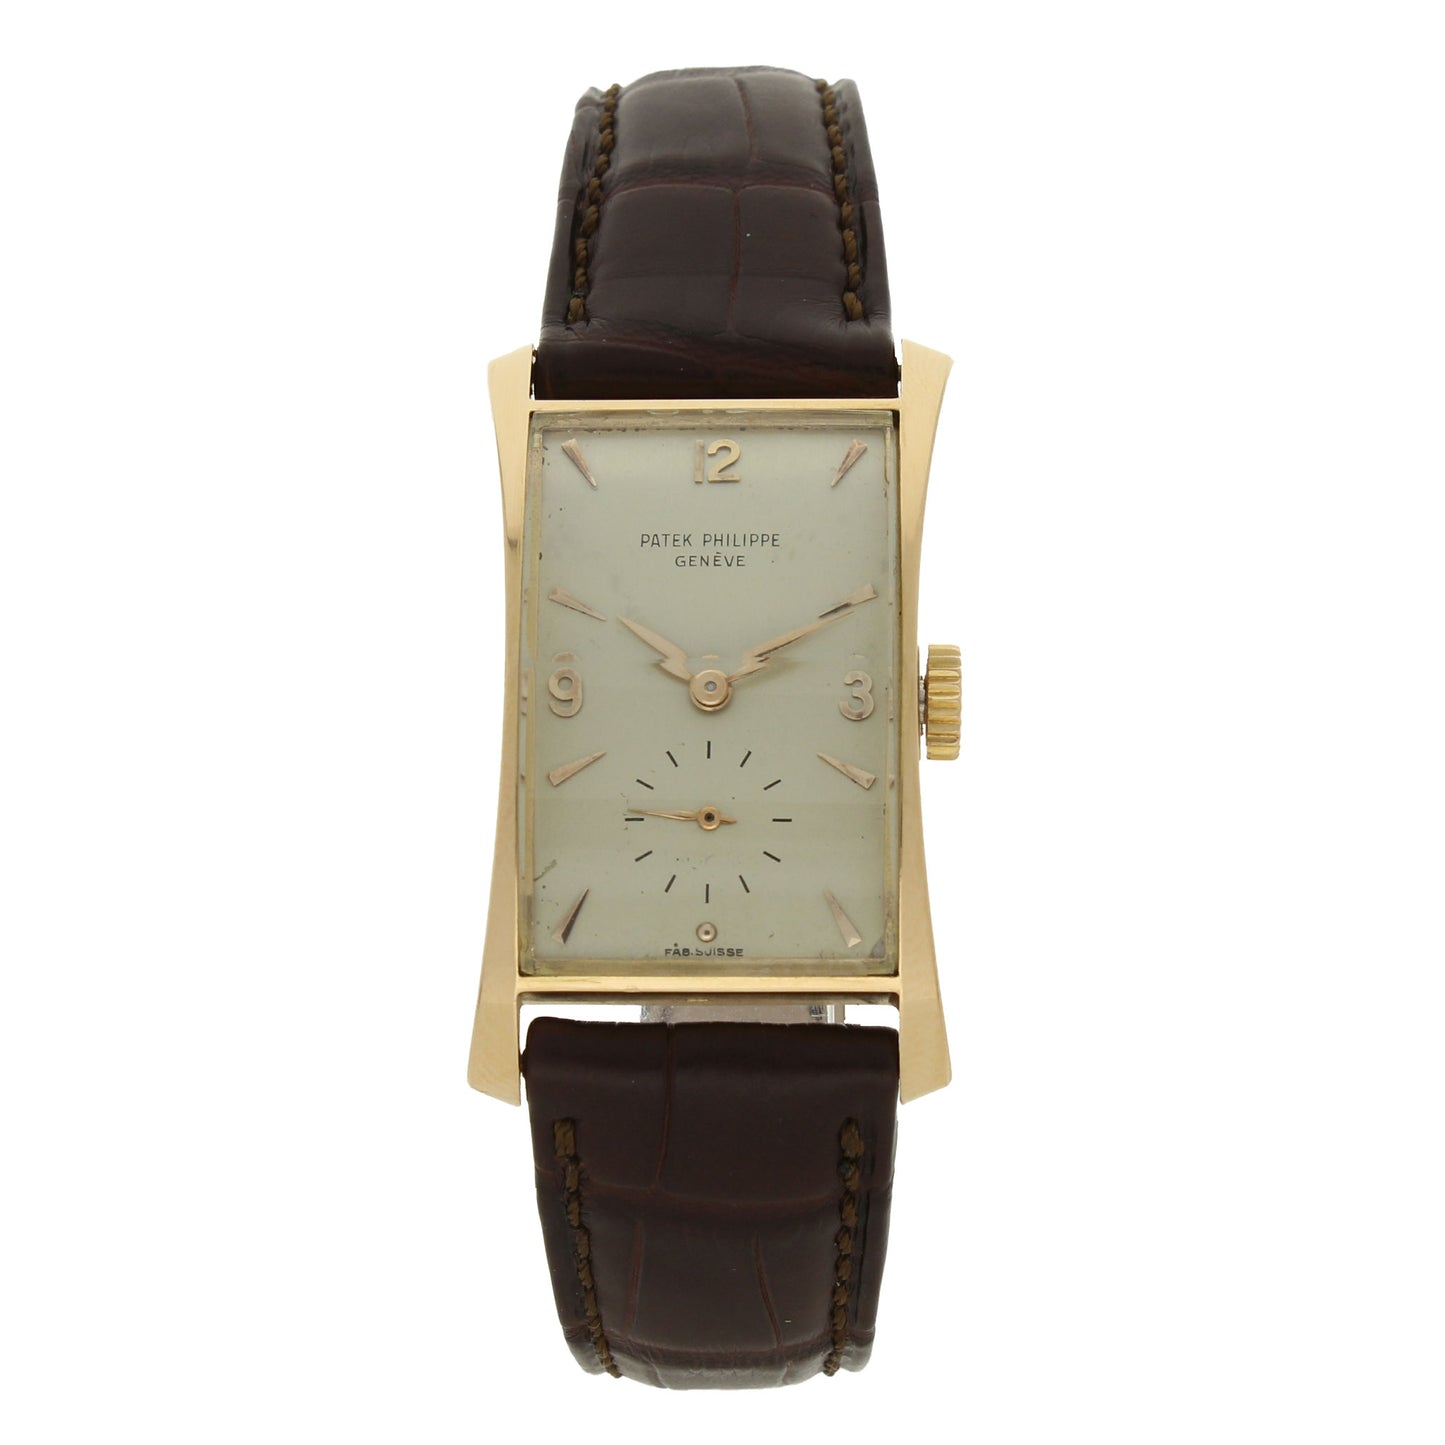 18ct rose gold, reference 1593 'Hour glass' wristwatch. Made 1954